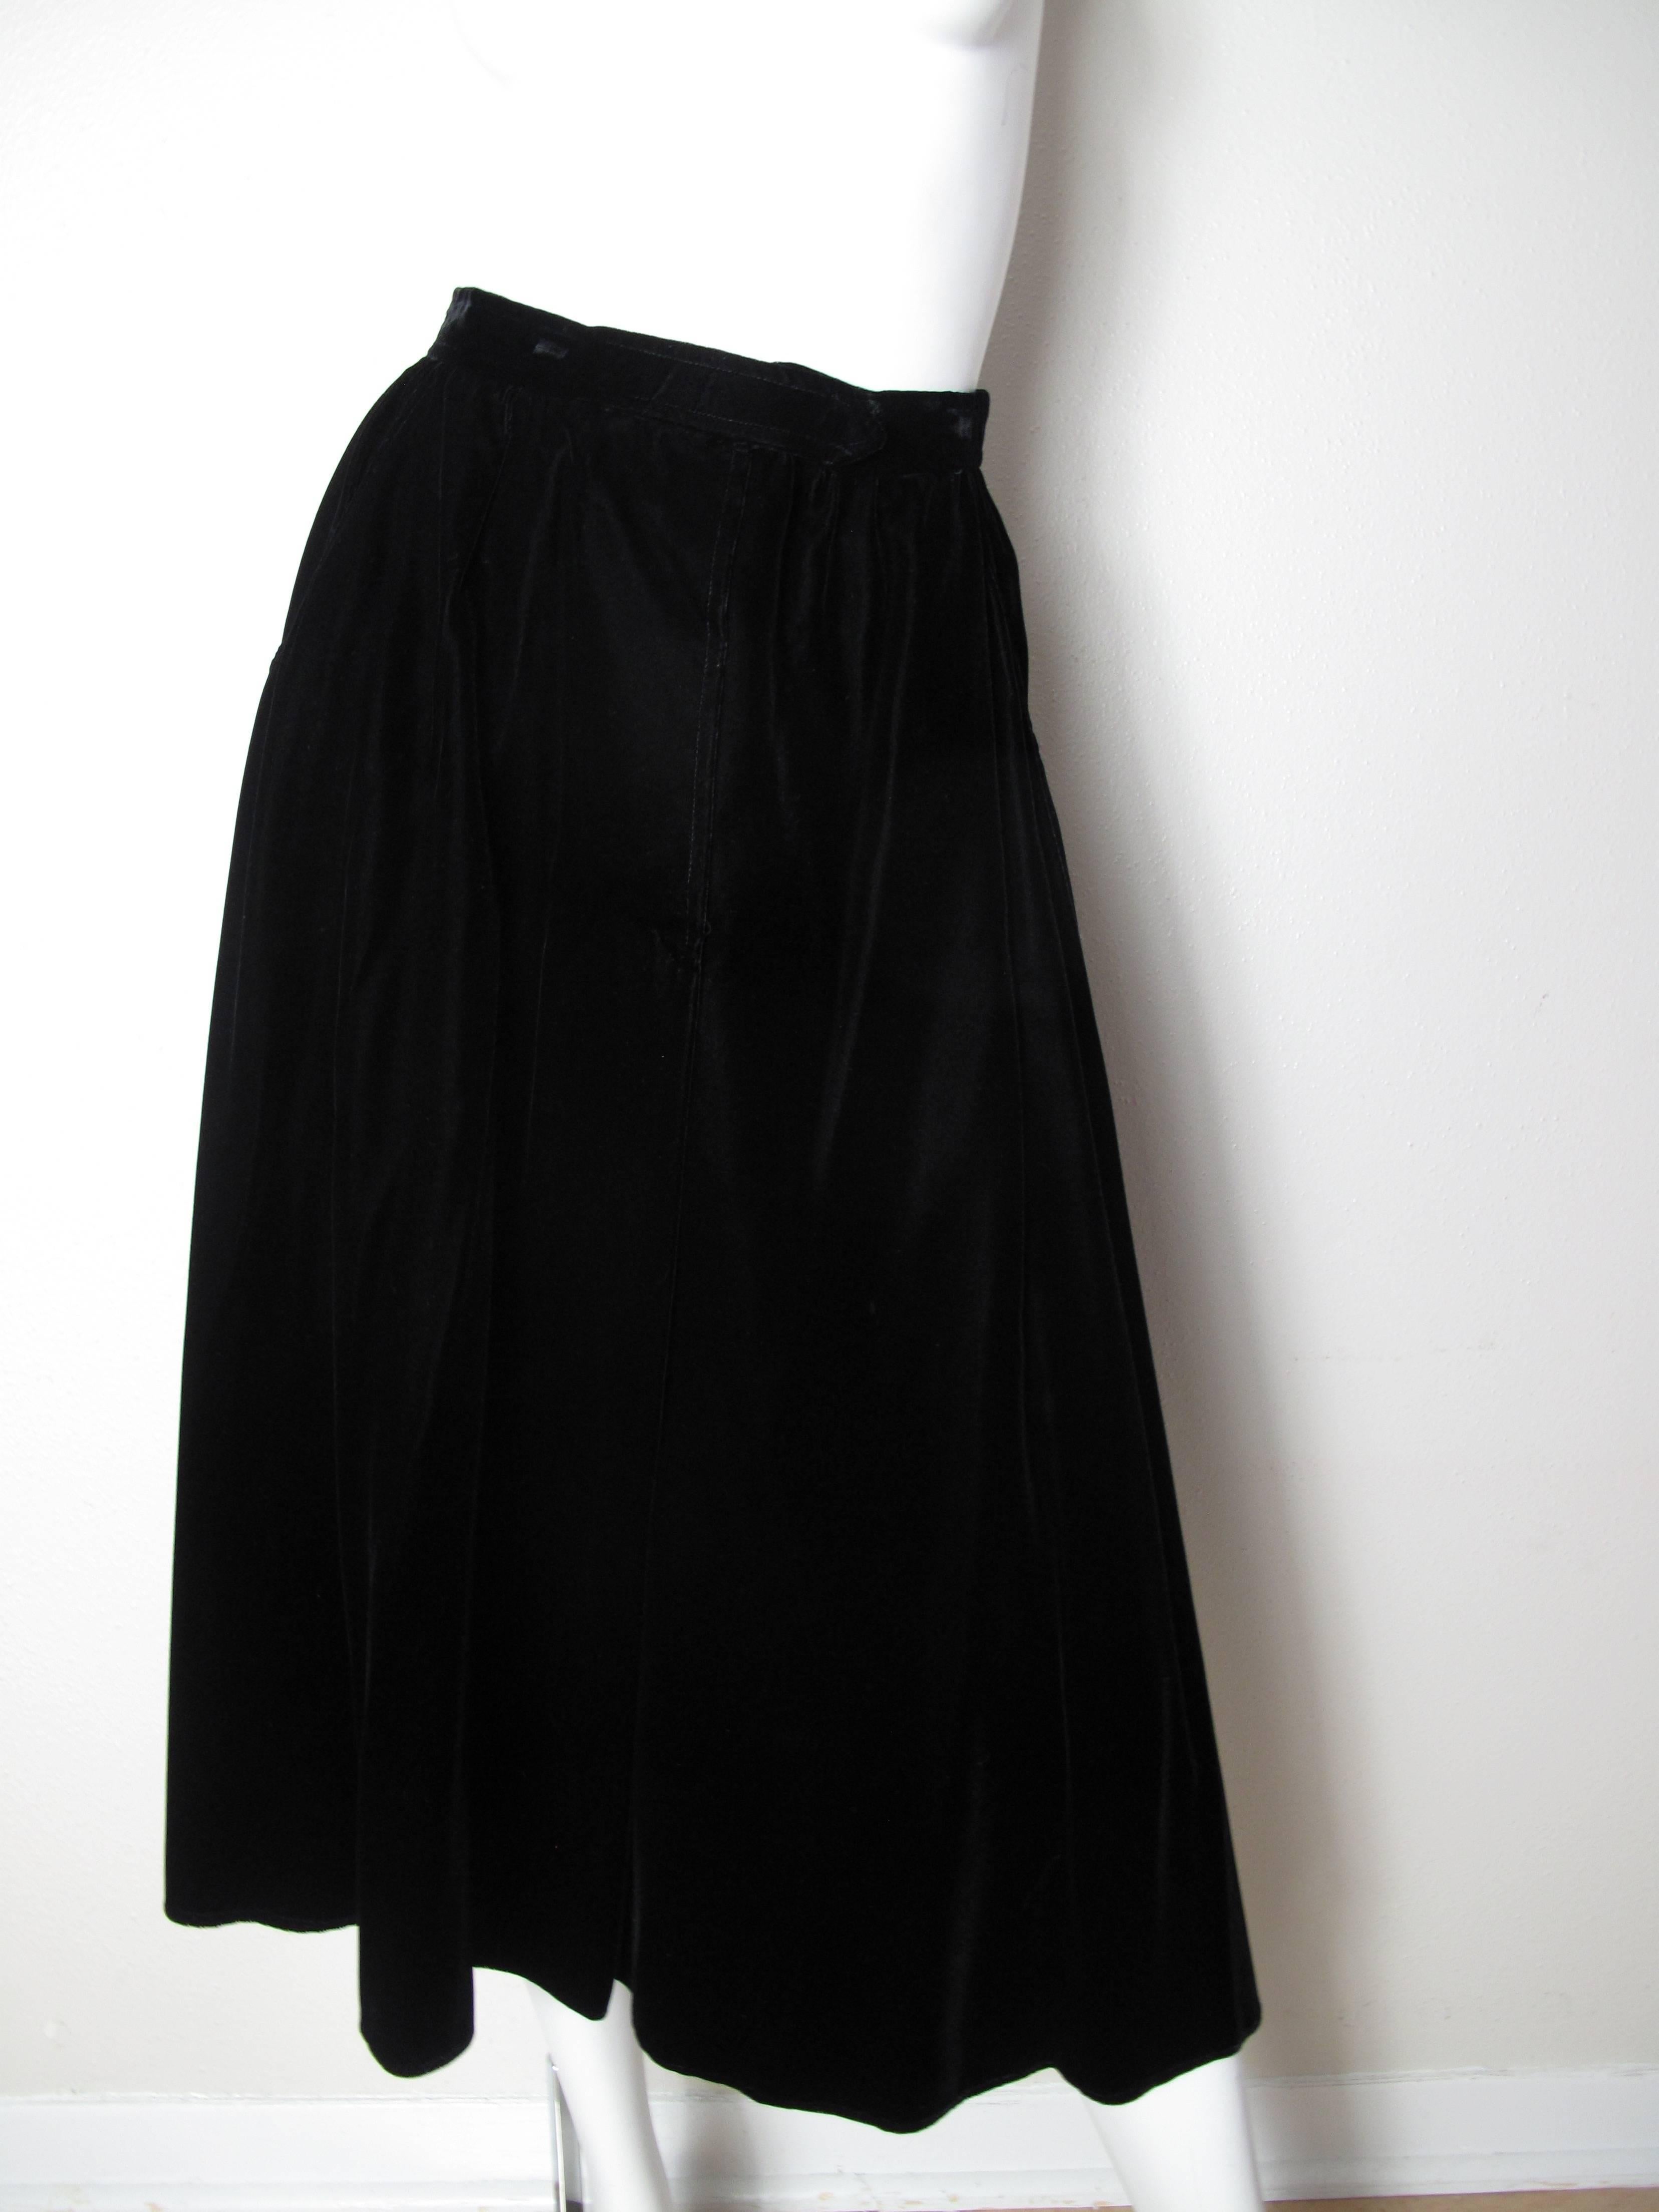 Oscar de la Renta black velvet jacket with braided trim and skirt.  Condition: Excellent. Skirt label: Size 8 / Jacket size 10. Fits current Size 6 / 8 

We accept returns for refund, please see our terms.  We offer free ground shipping within the